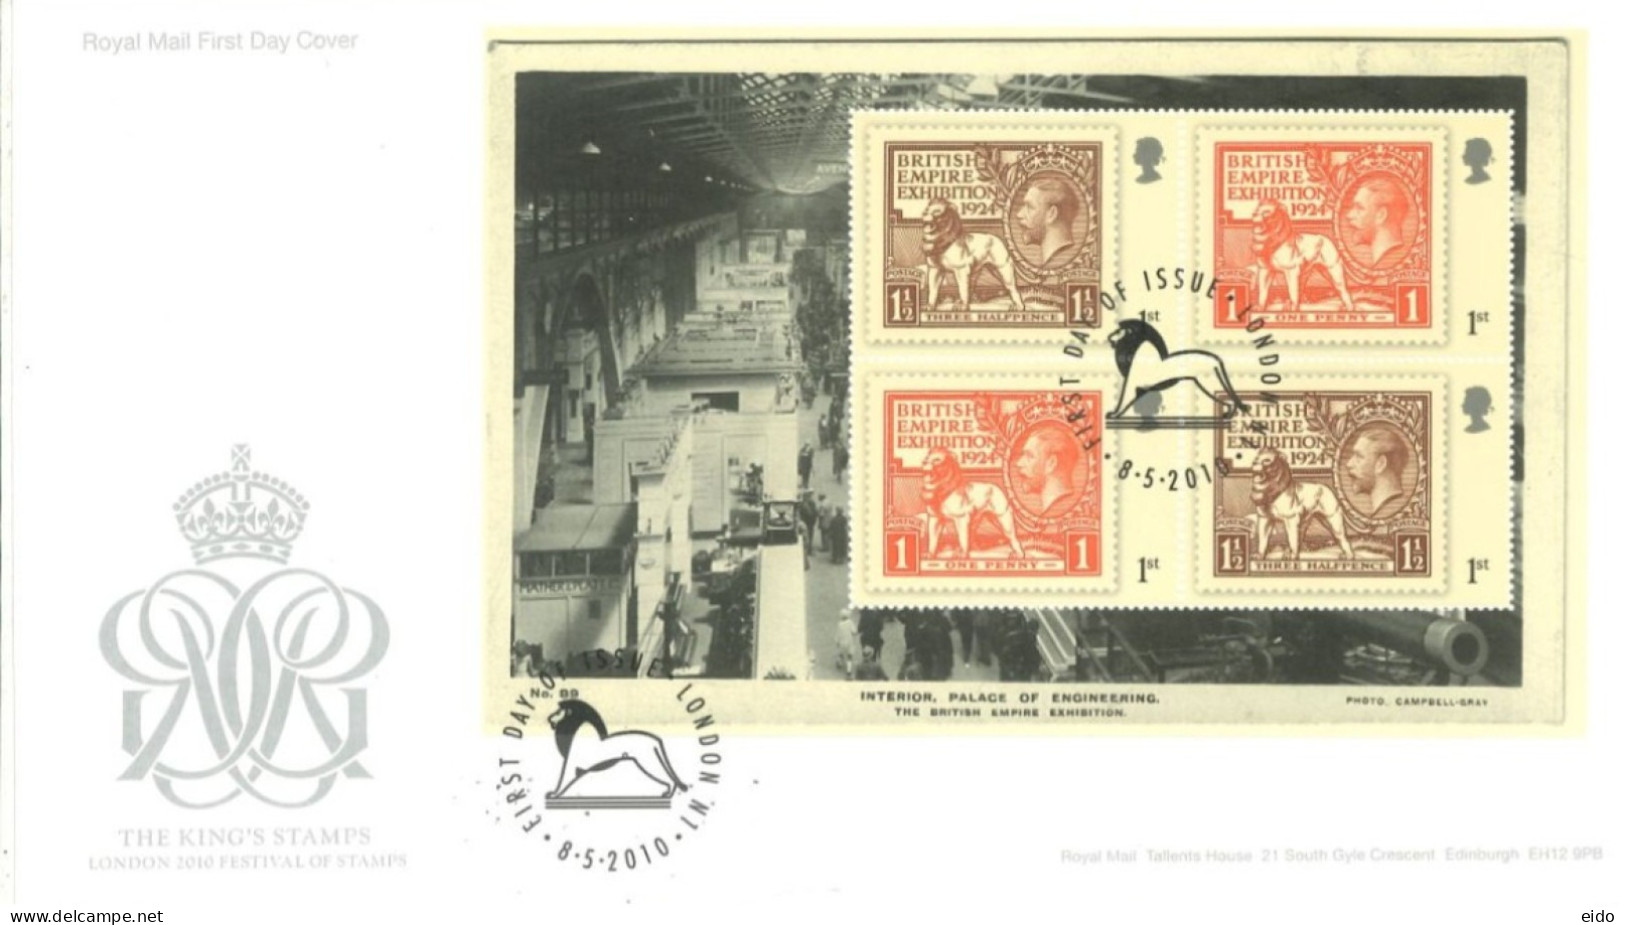 GREAT BRITAIN - 2010, FDC OF MINIATURE SHEET OF THE KING'S STAMPS, LONDON 2010 FESTIVAL OF STAMPS. - Storia Postale